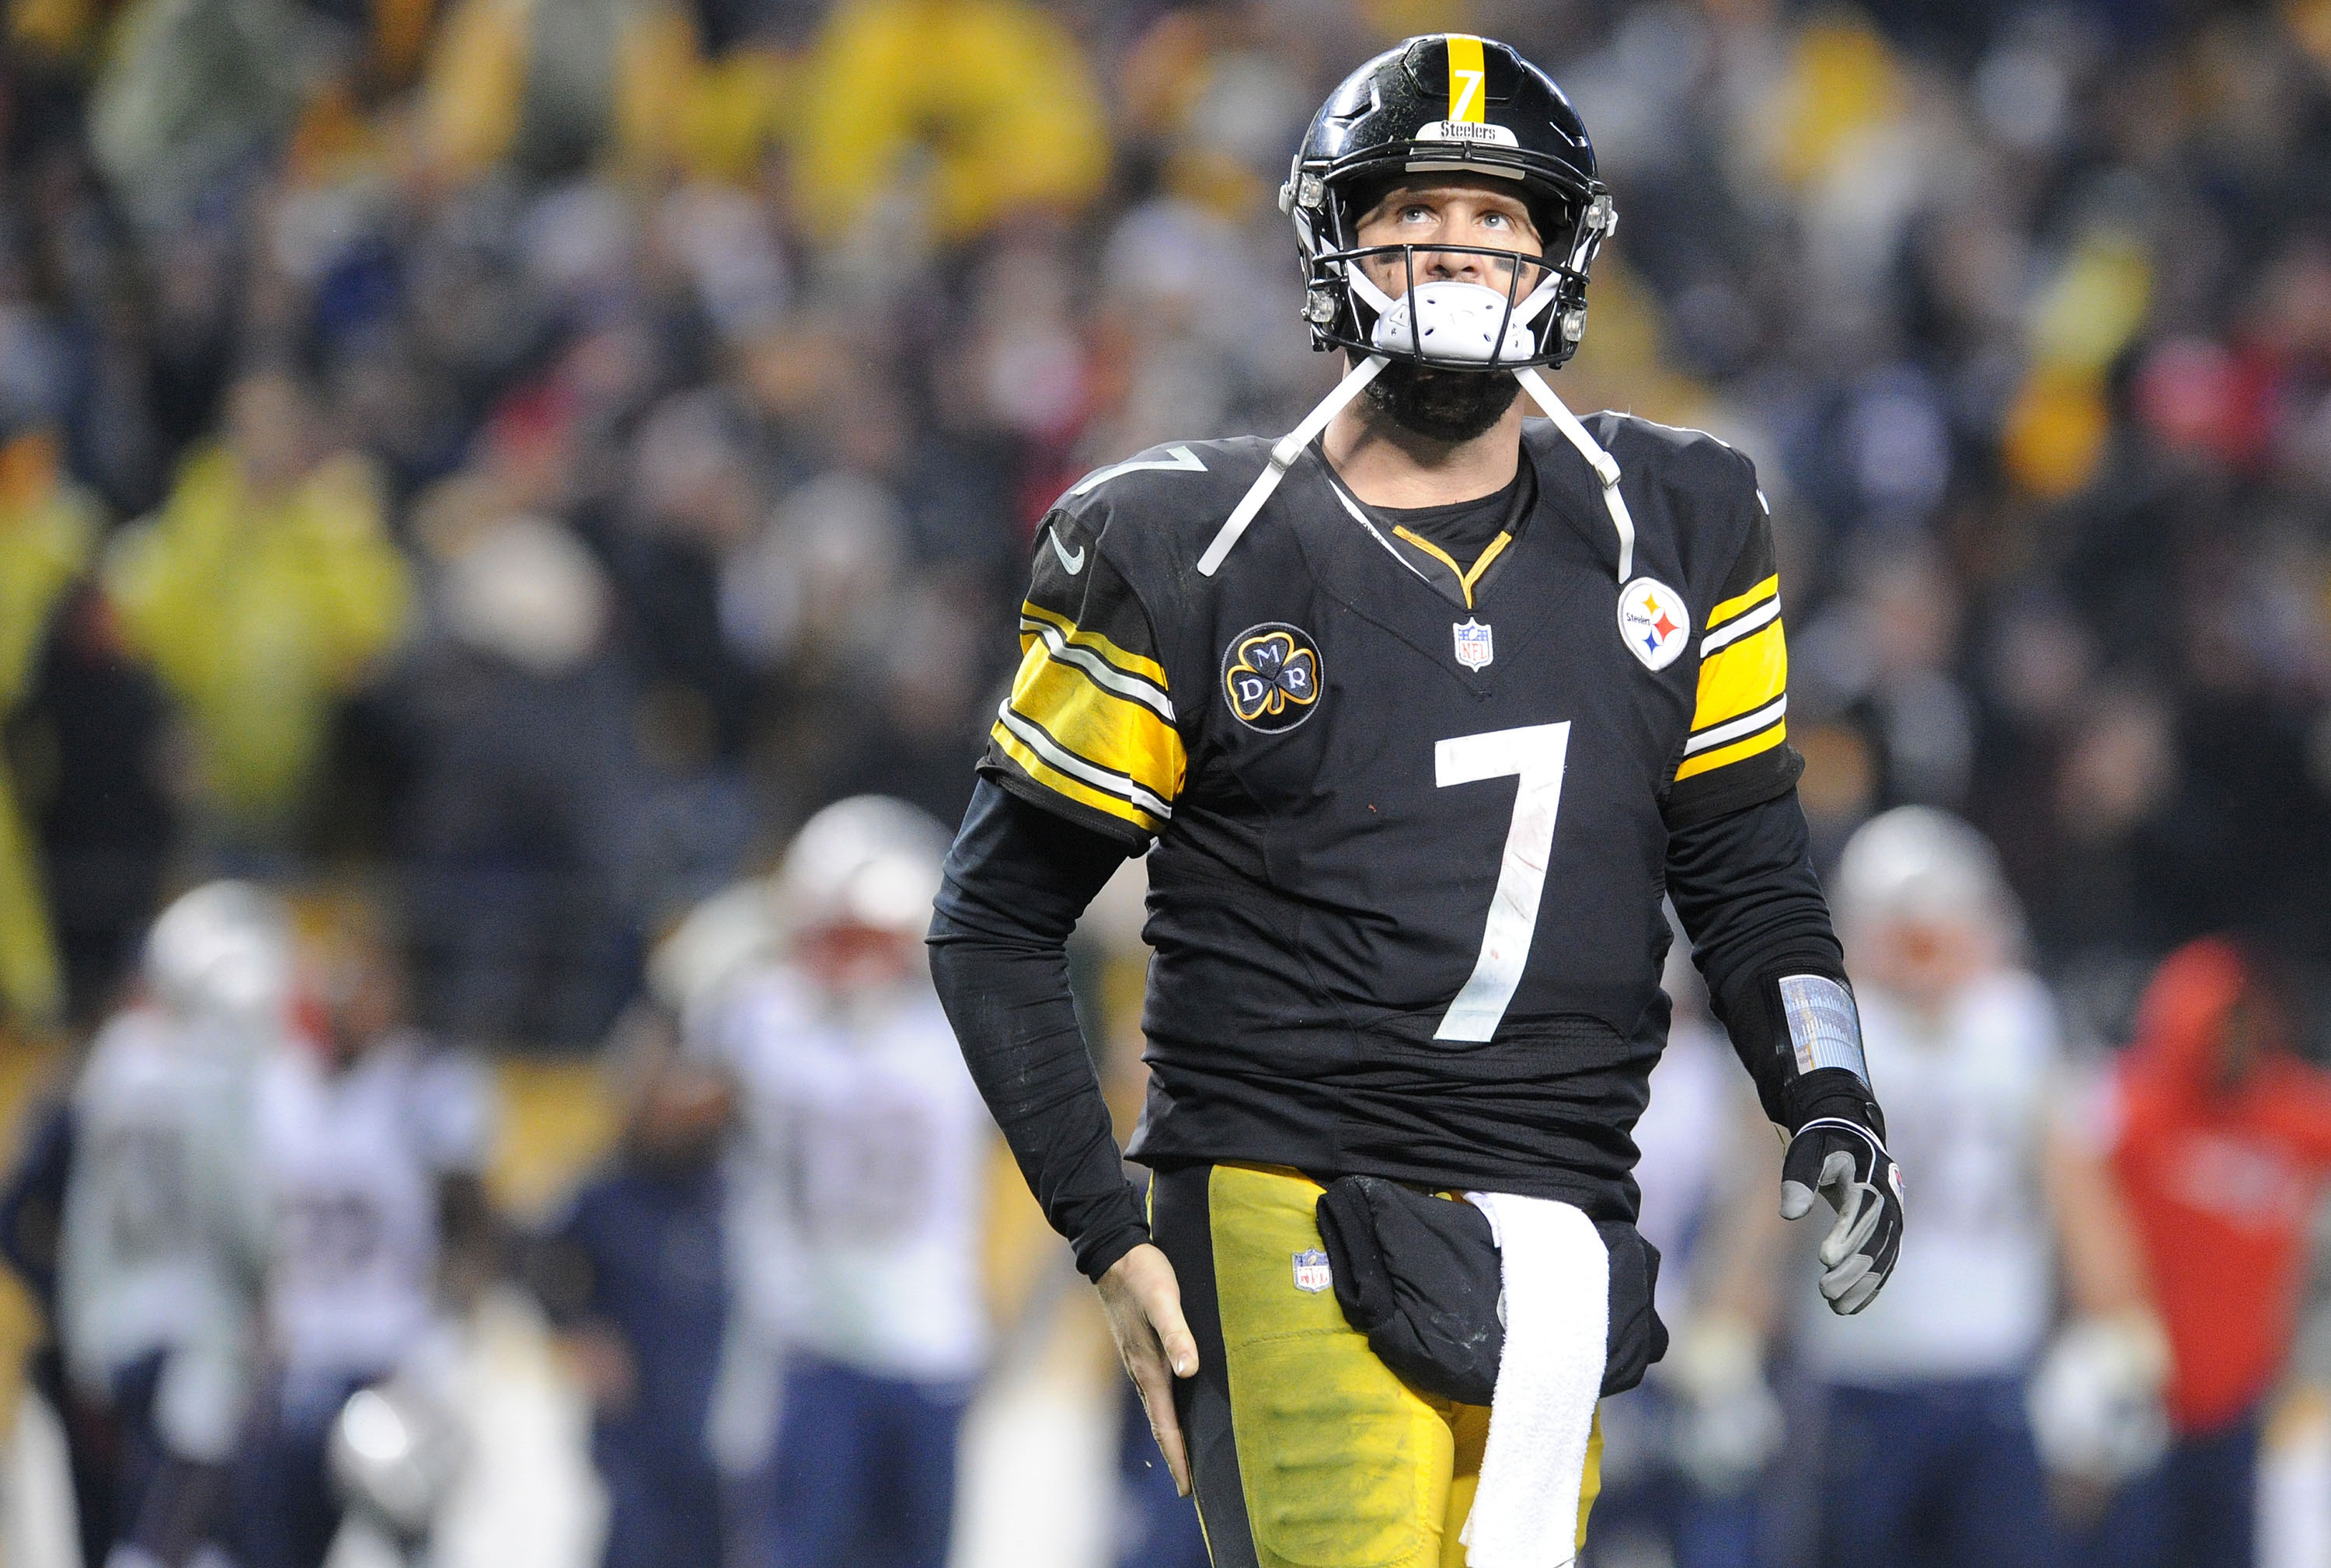 NFL Expert Picks: Who experts are predicting in Steelers vs